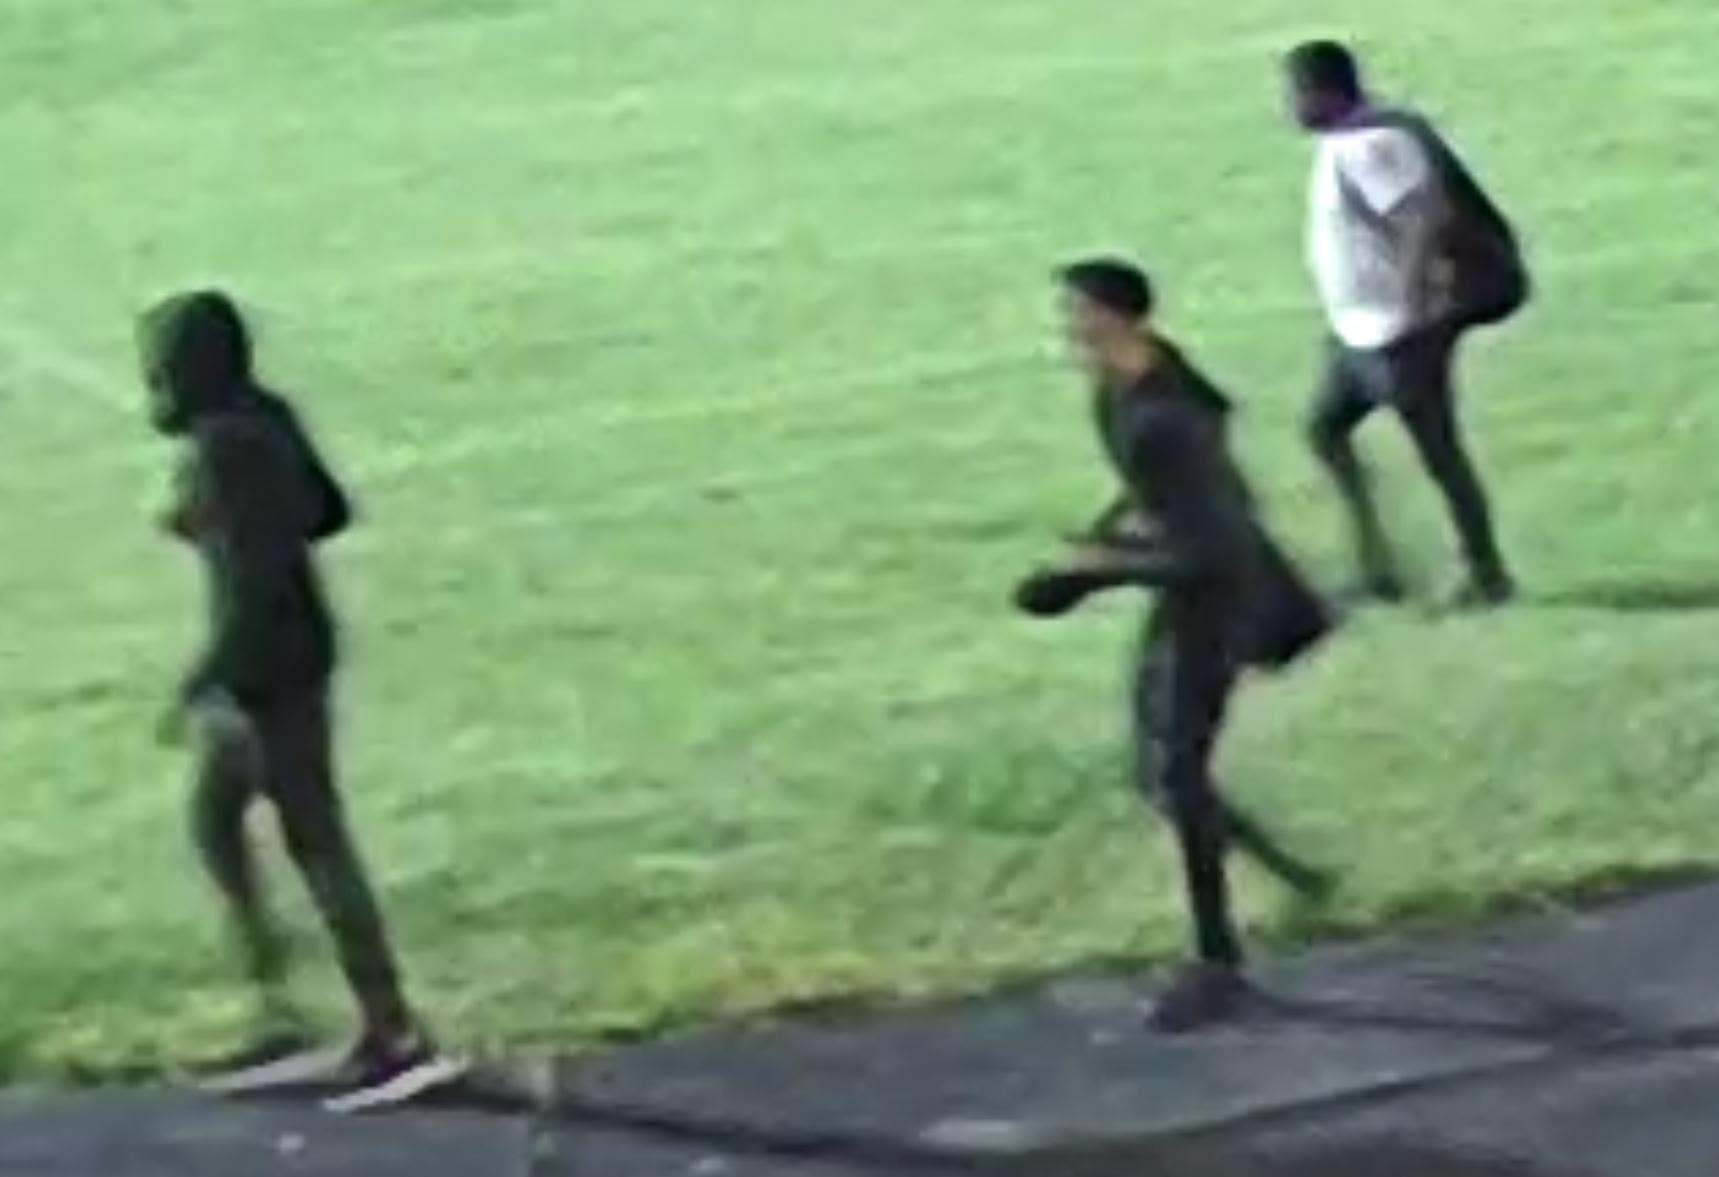 Baltimore police release video of persons of interest in Morgan State University shooting